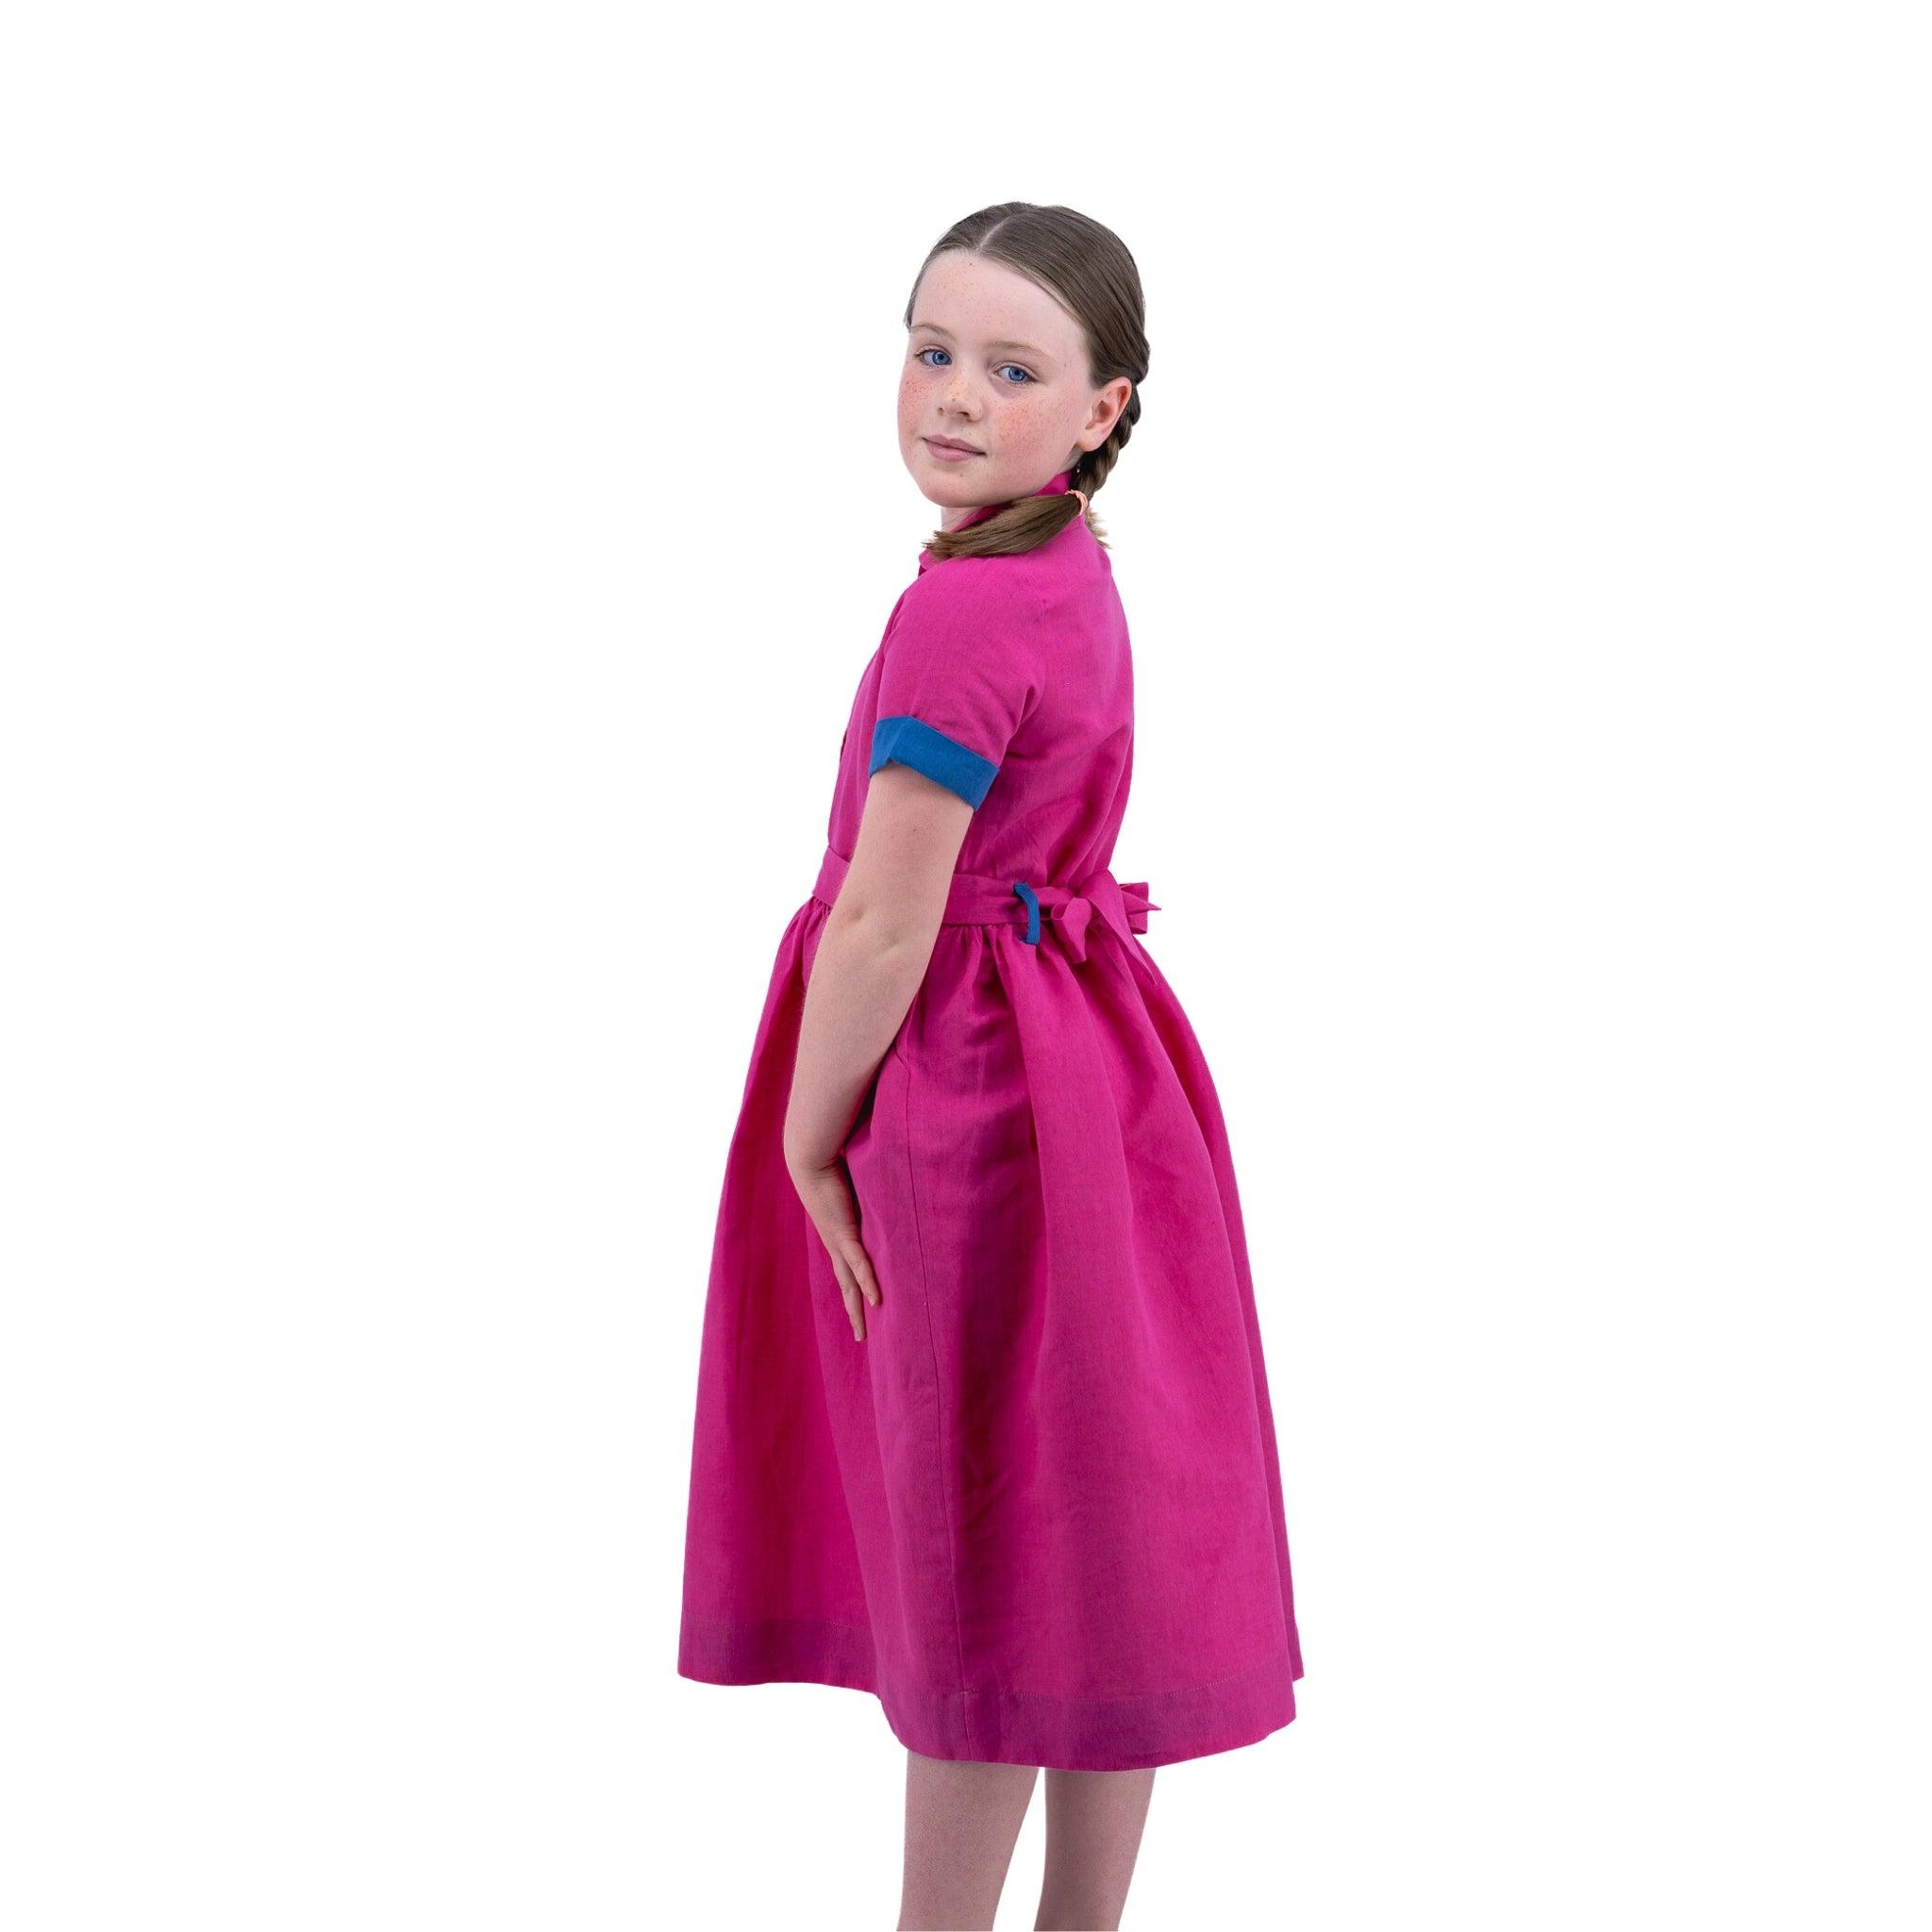 Young girl in a Karee fuchsia purple linen dress for girls with blue trim, standing sideways and looking over her shoulder against a white background.